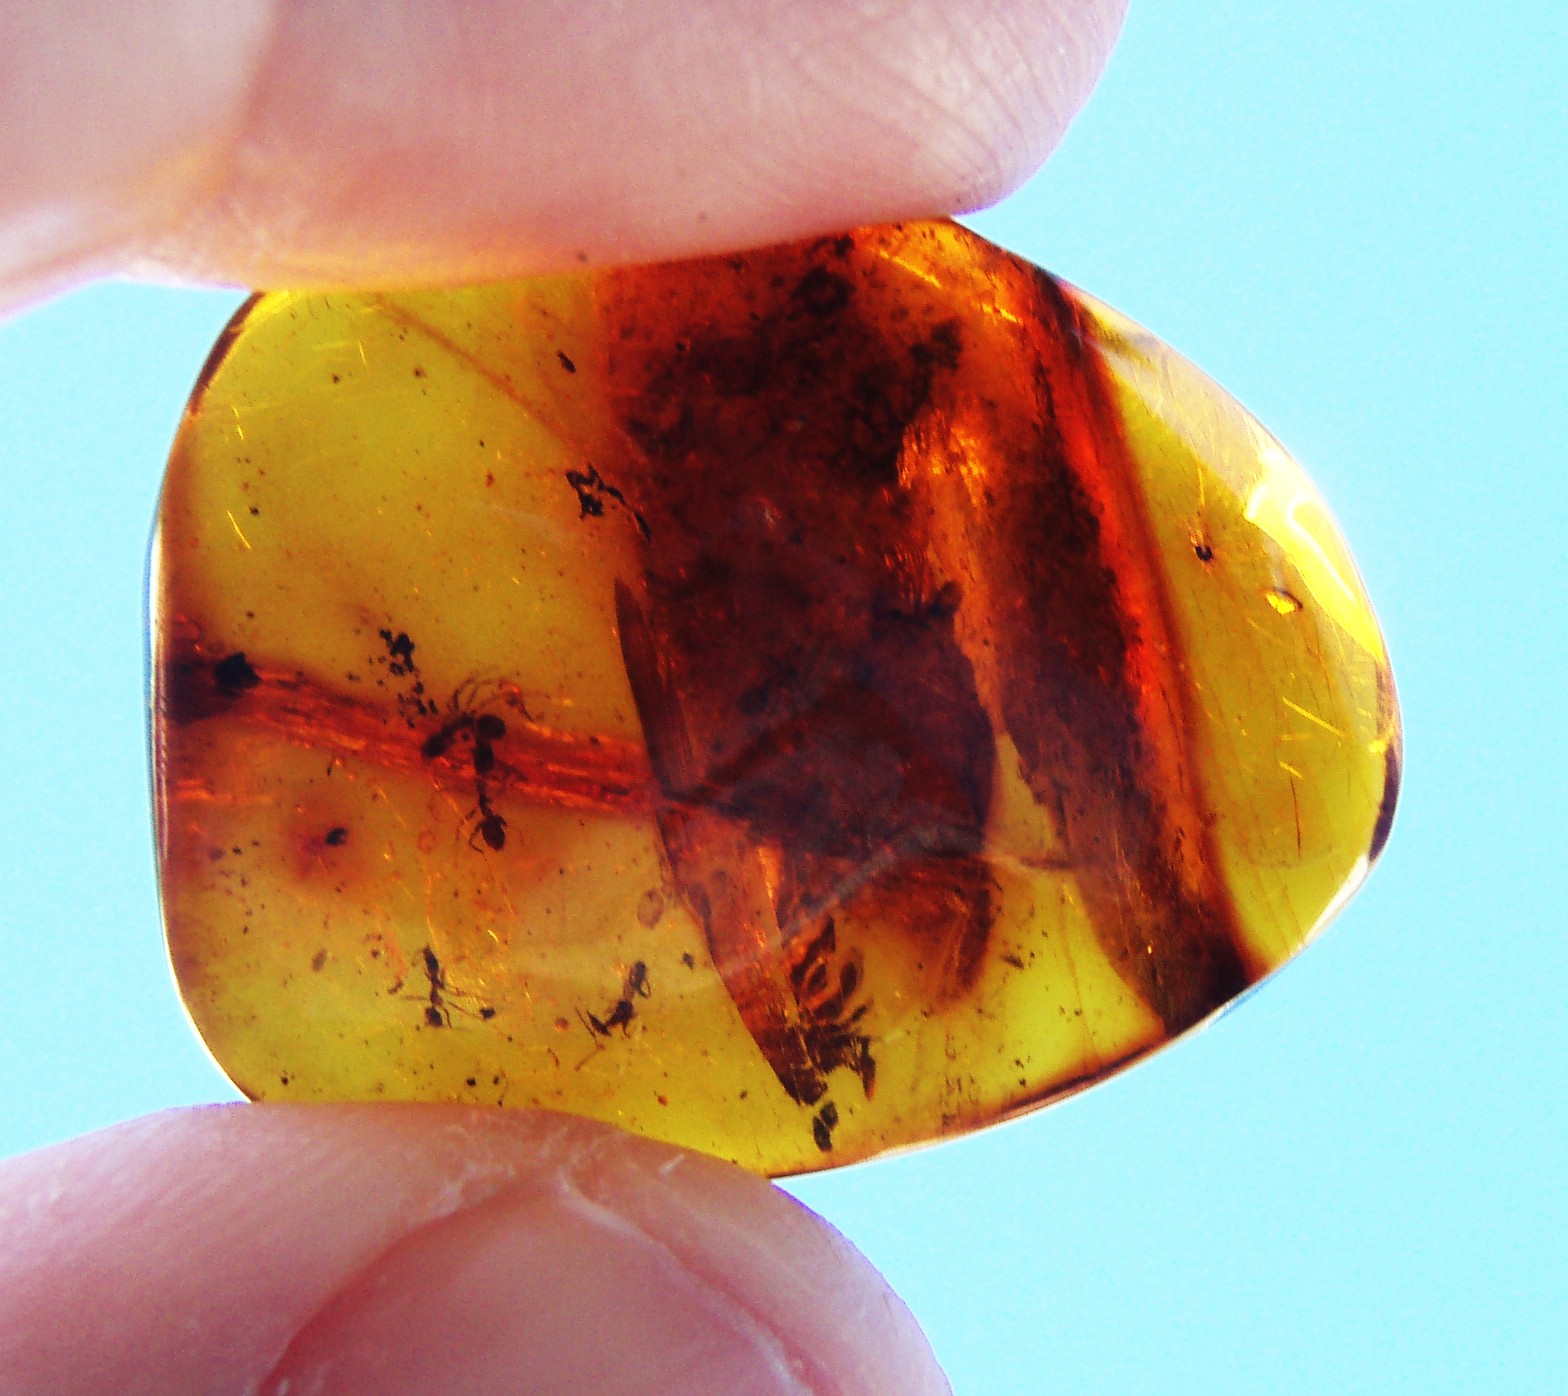 Ants in 80-million-year-old Baltic amber. - PHOTO BY MILA ZINKOVA/WIKIMEDIA COMMONS